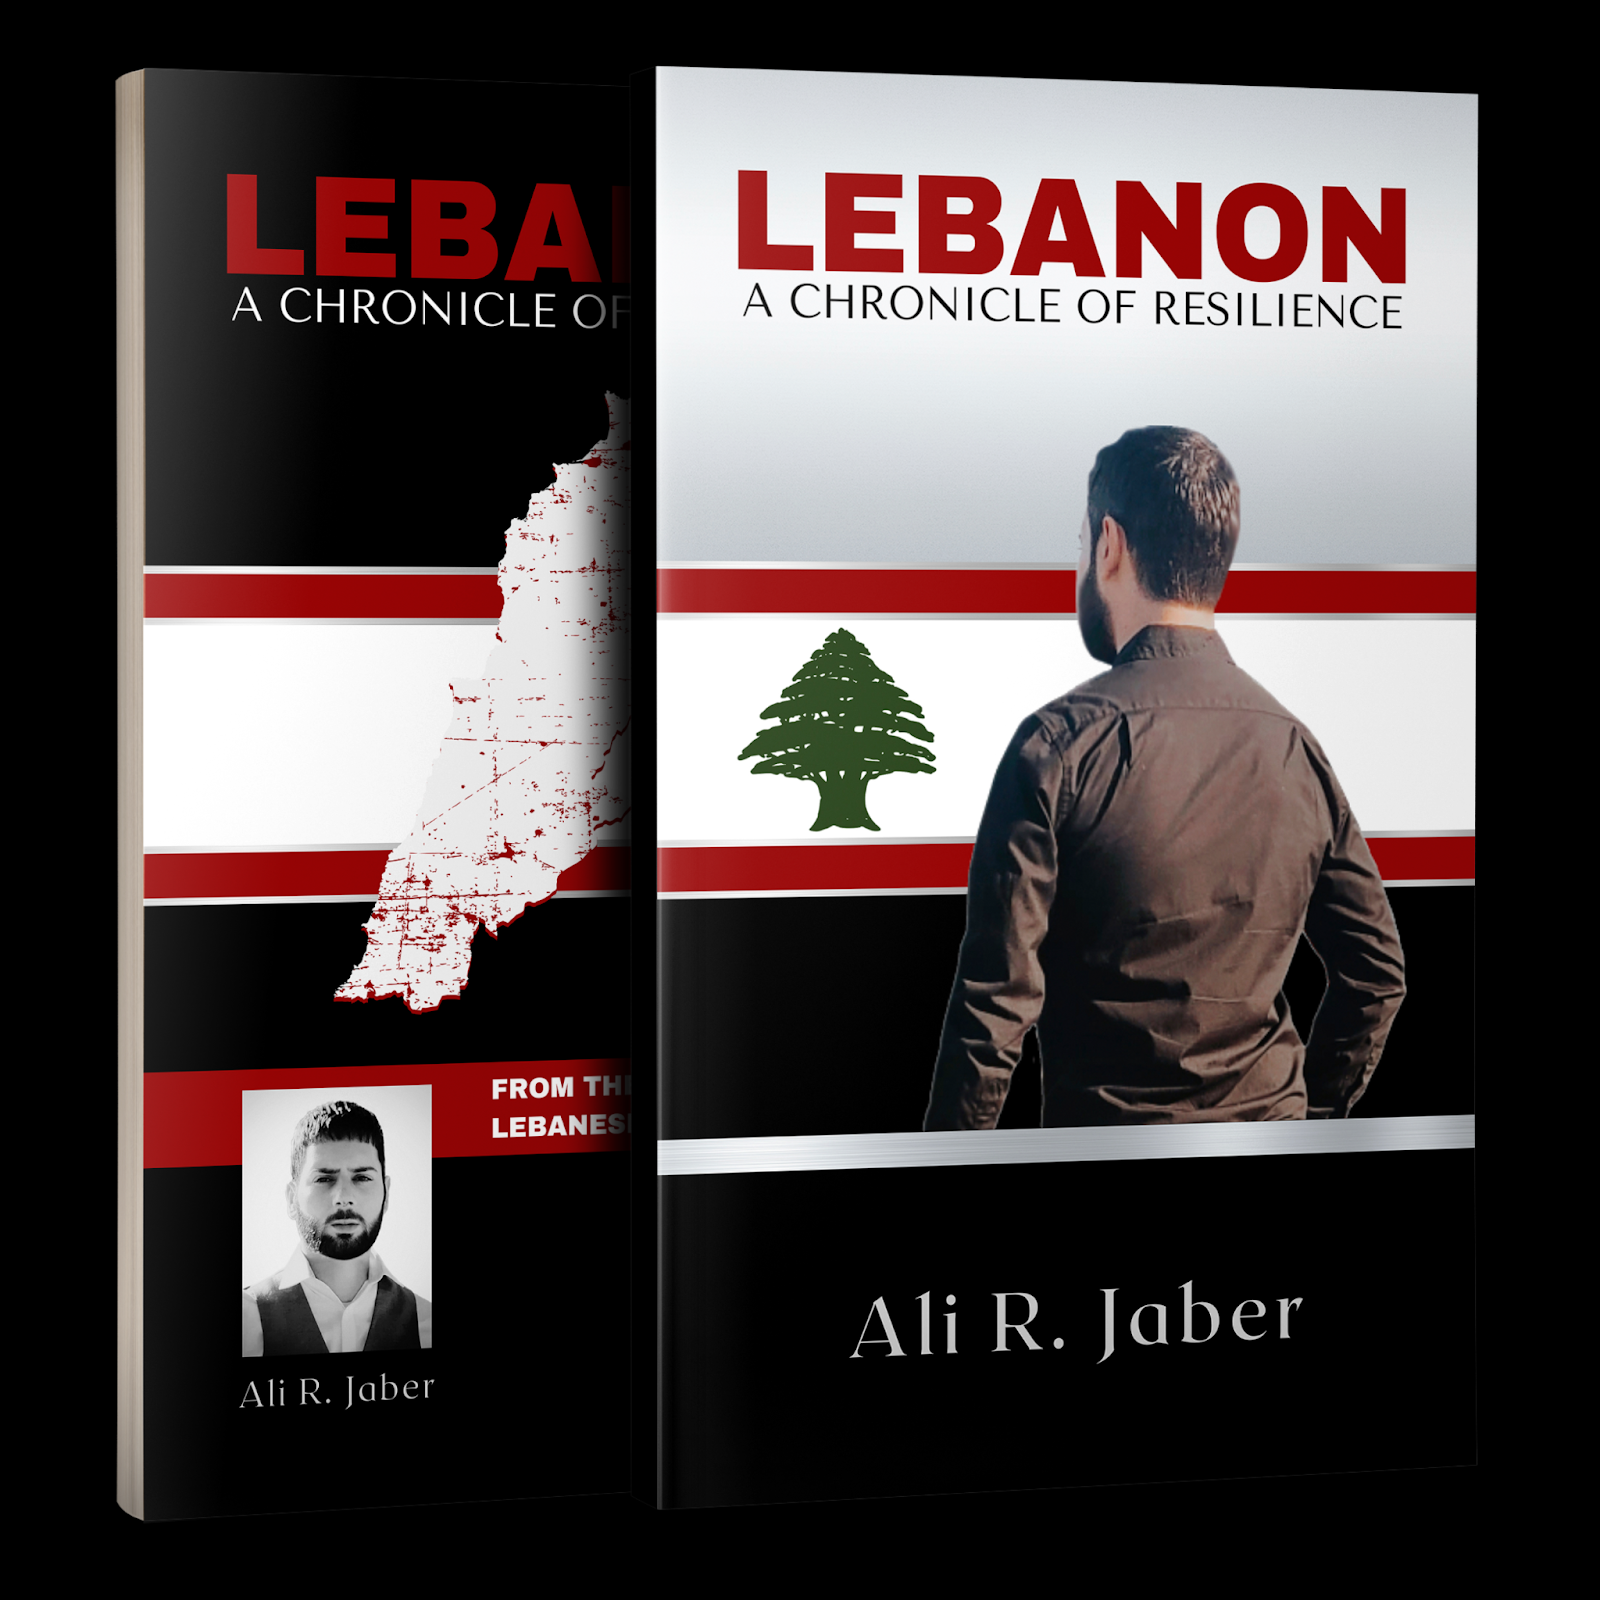 Local Detroit Author Publishes New Book: “Lebanon: A Chronicle of Resilience”